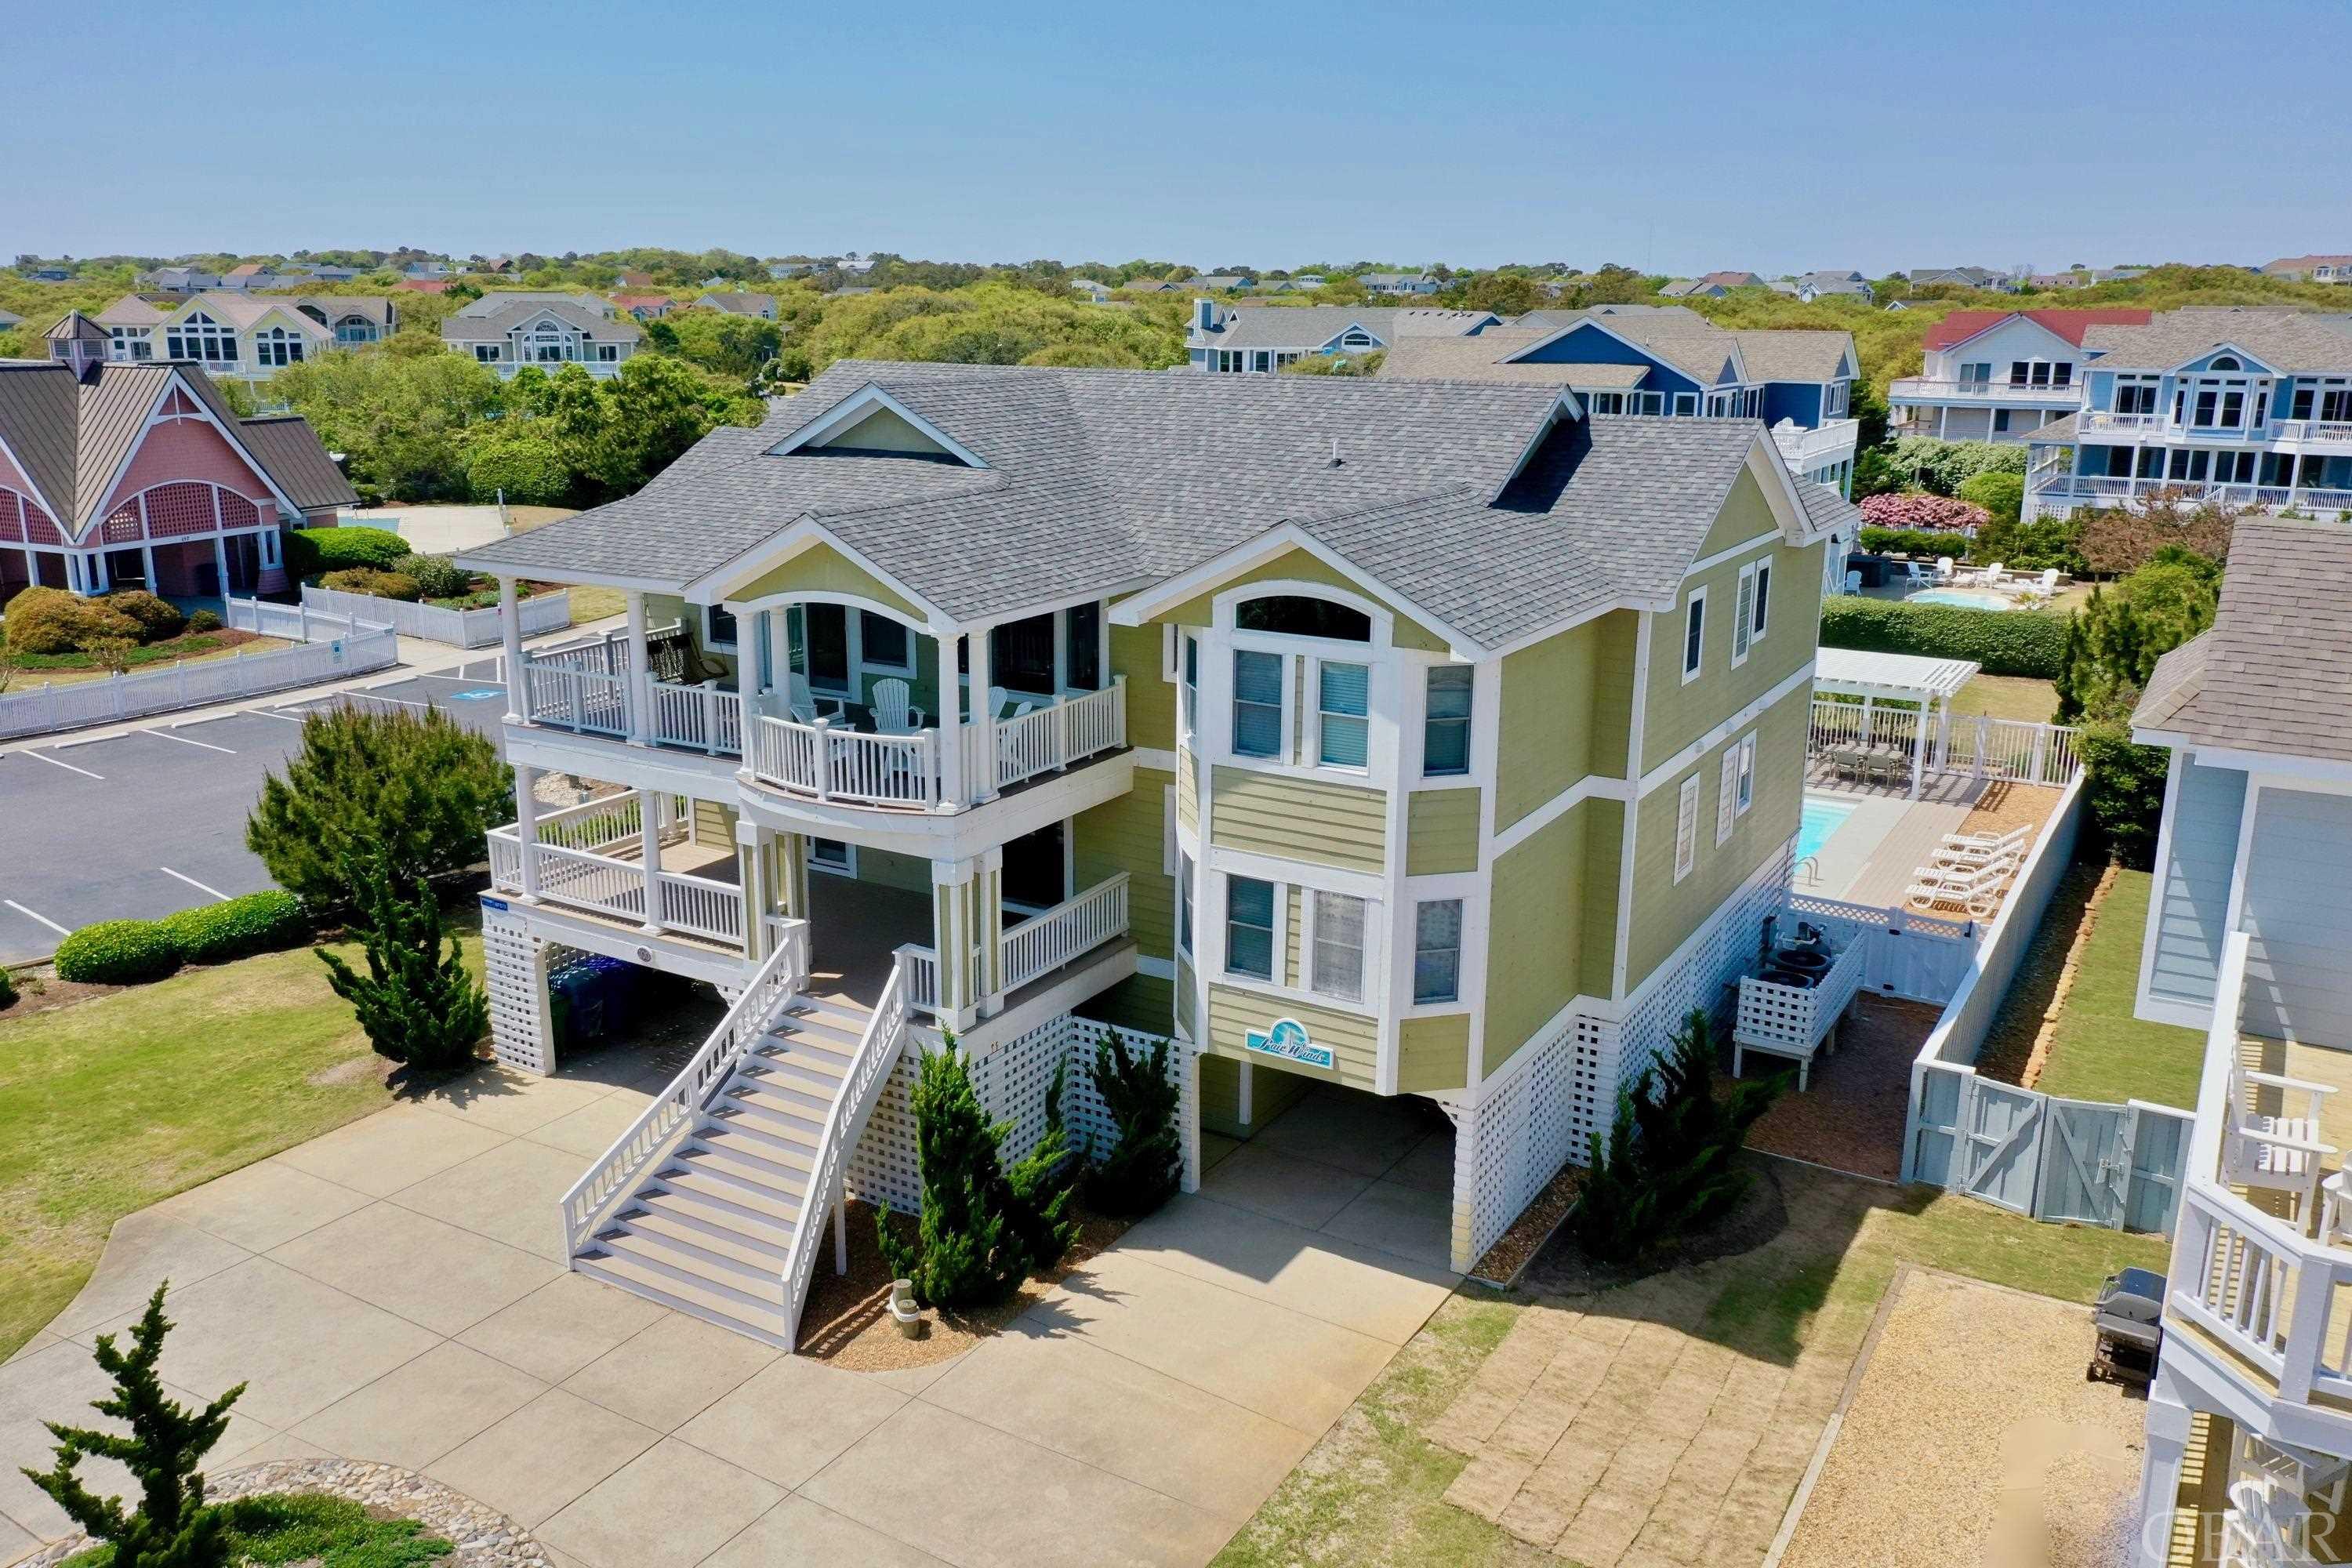 This is the one you have been waiting for! Located on a coveted 1/2 acre homesite in the exclusive community of Four Seasons. The semi-oceanfront location boasts a direct beach access, stunning ocean views, a large backyard perfect for an event tent, and sits on a private cul de sac with only 4 homes. Enjoy amazing ocean views without the risk and maintenance of oceanfront. This luxury 7 bedroom (5 are private En-suites), 7.5 bath retreat home has been lovingly maintained and meticulously cared for. Boasting an open functional floor plan with plenty of room to spread out, private bath access from all 7 bedrooms, multiple gathering areas, wrap around decks, renovated chef's kitchen (2018), tankless water heater, a large 15x33 private pool with pergola and outdoor kitchen, irrigation, new carpet and LVT Flooring throughout (2018), New Trex decking on the westside of the top and mid-level (2020), new roof (2020), 2 new HVAC systems in 2021, fresh exterior paint to be completed in May, a new irrigation pump (May 2022, $2,000.00), and more. See seller upgrades in associated docs. The top level features a grand great room with soothing coastal colors, electric fireplace, vaulted ceilings, of course ocean views, large dining room, Luxury Vinyl Tile, a reading nook/office, freshly renovated kitchen, a powder bath, and 2 Primary bedrooms. The "to die for" Kozy Kitchens design features; soft-close custom cabinets, stainless steel appliances including a dual zoned wine refrigerator for wine and canned beverages, glass tile backsplash, eat -in bar with lots of storage, Quartz countertops, and a spacious pantry. The great room is perfect for entertaining large family gatherings. There are two ensuite bedrooms with private baths, one with a walk-in tile shower and separate water closet. One bedroom has a private deck access and the other gorgeous ocean views. The mid-level includes 5 more bedrooms, the main entry, and the utility room with a laundry sink. Three of the five bedrooms are primary bedrooms with private baths. The 2 king bedrooms have a walk-in tile shower, and double vanity. The 5th primary bedroom has two duo bunk sets with a private bath and deck access. The remaining two bedrooms share a jack and jill bath. The lower level has a huge media room with surround sound, a large TV, and plenty of comfortable seating. The game room features kitchenette with a full size fridge, microwave, and custom cabinetry with lots of storage. This room also has direct access to the outdoor living space where adults and children love to play. There's an ample sized pergola offering plenty of shade, an outdoor kitchen complete with a gas grill, an outdoor shower, a sand volleyball court, and a huge lush green open space perfect for a tent where you can have large weddings or special events. This house has it all and the sellers have thought of everything. The Four Seasons Community has a lot offer in amenities and help make the rental income in the shoulder season a winner. Enjoy the large outdoor community pool that is close by, the indoor pool and fitness center, the out tennis courts, play ground, and trolley system. The house is rented from March to October so the only time to see it is on Sunday, the turnover day. Sellers have lots of repeat rentals and could be more aggressive on weekly rates. Exterior will be freshly painted in May. For aerial drone video copy and paste the following link: https://youtu.be/AXn9j4WNmBU ; For 3D Virtual Tour copy and paste the following link: https://my.matterport.com/show/?m=UwDsPfA2N2Z&mls=1